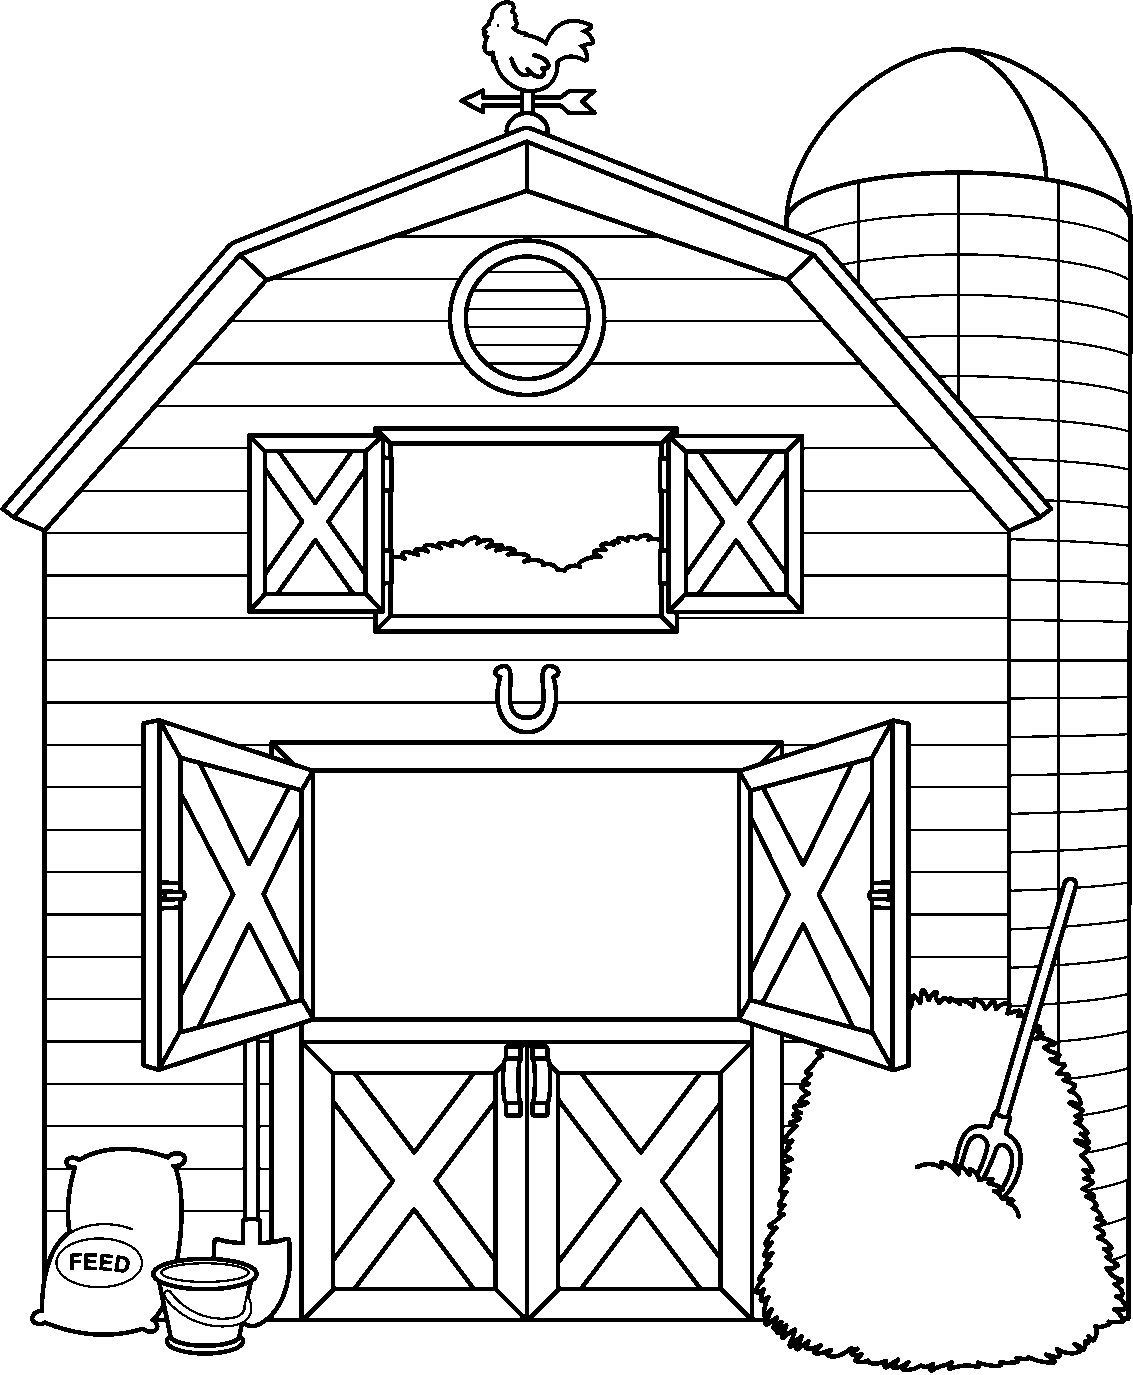 Barn black and white clipart